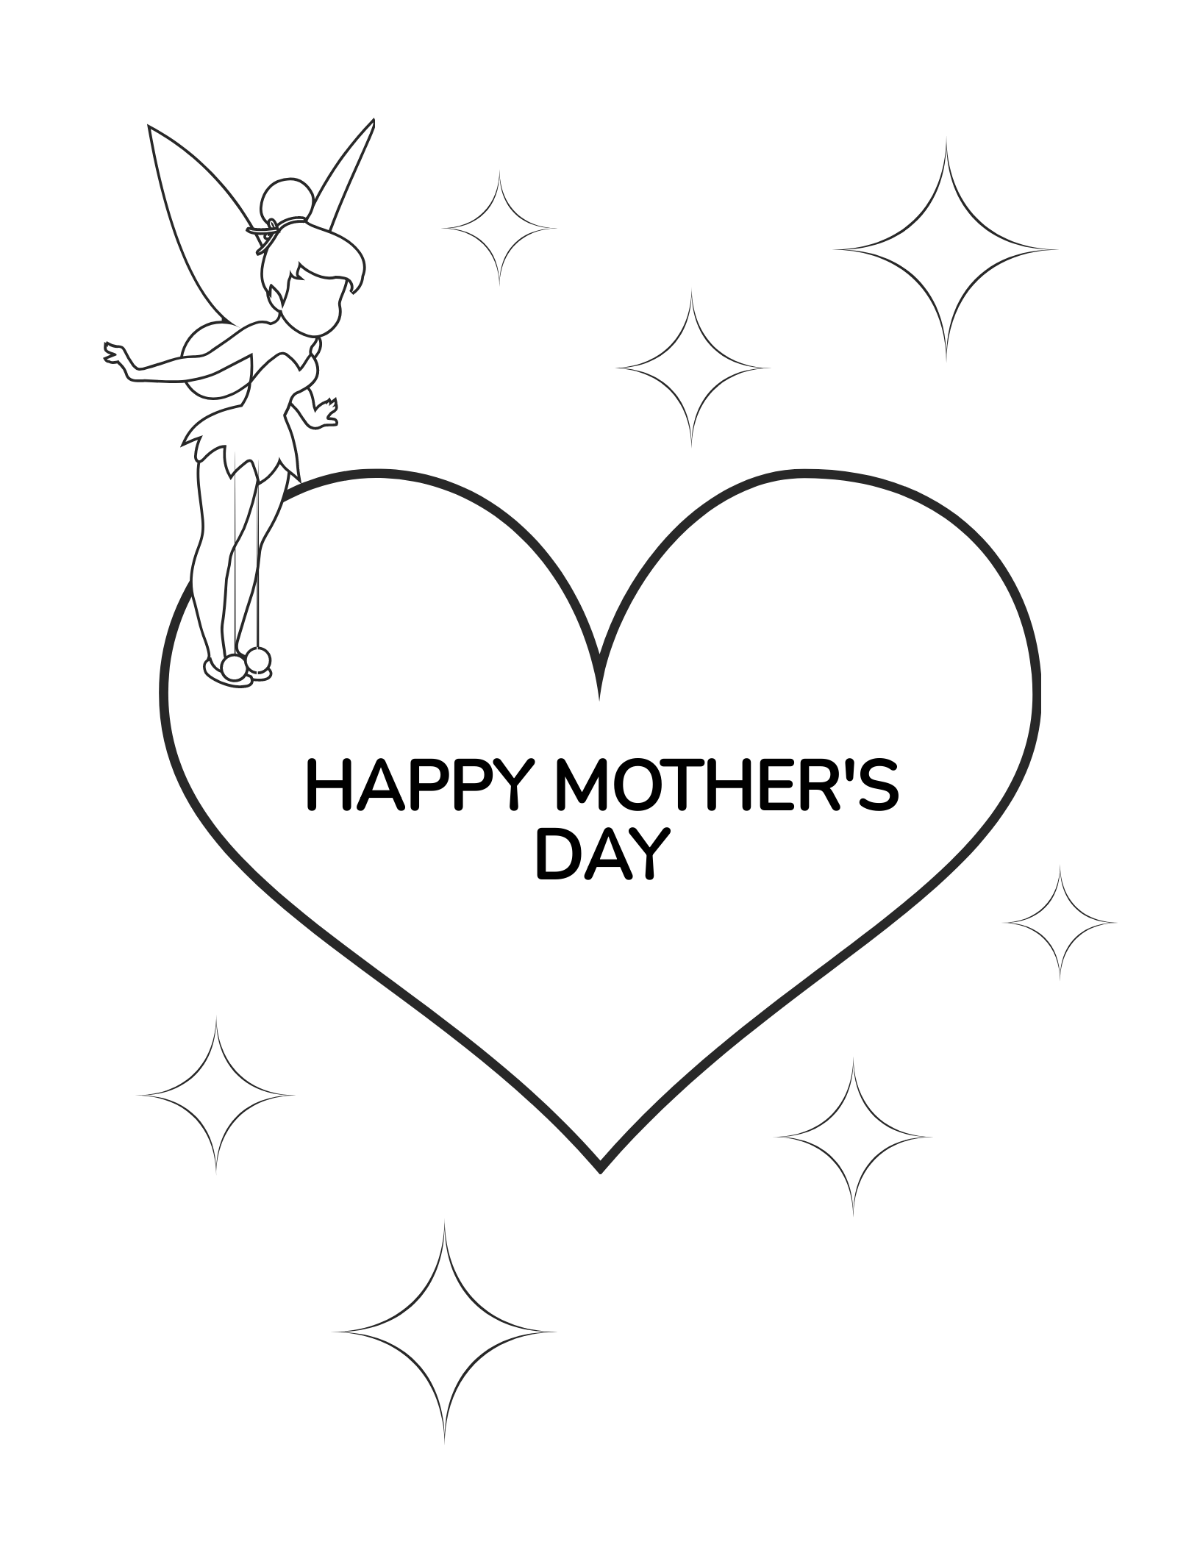 Disney Mother's Day Coloring Page Template